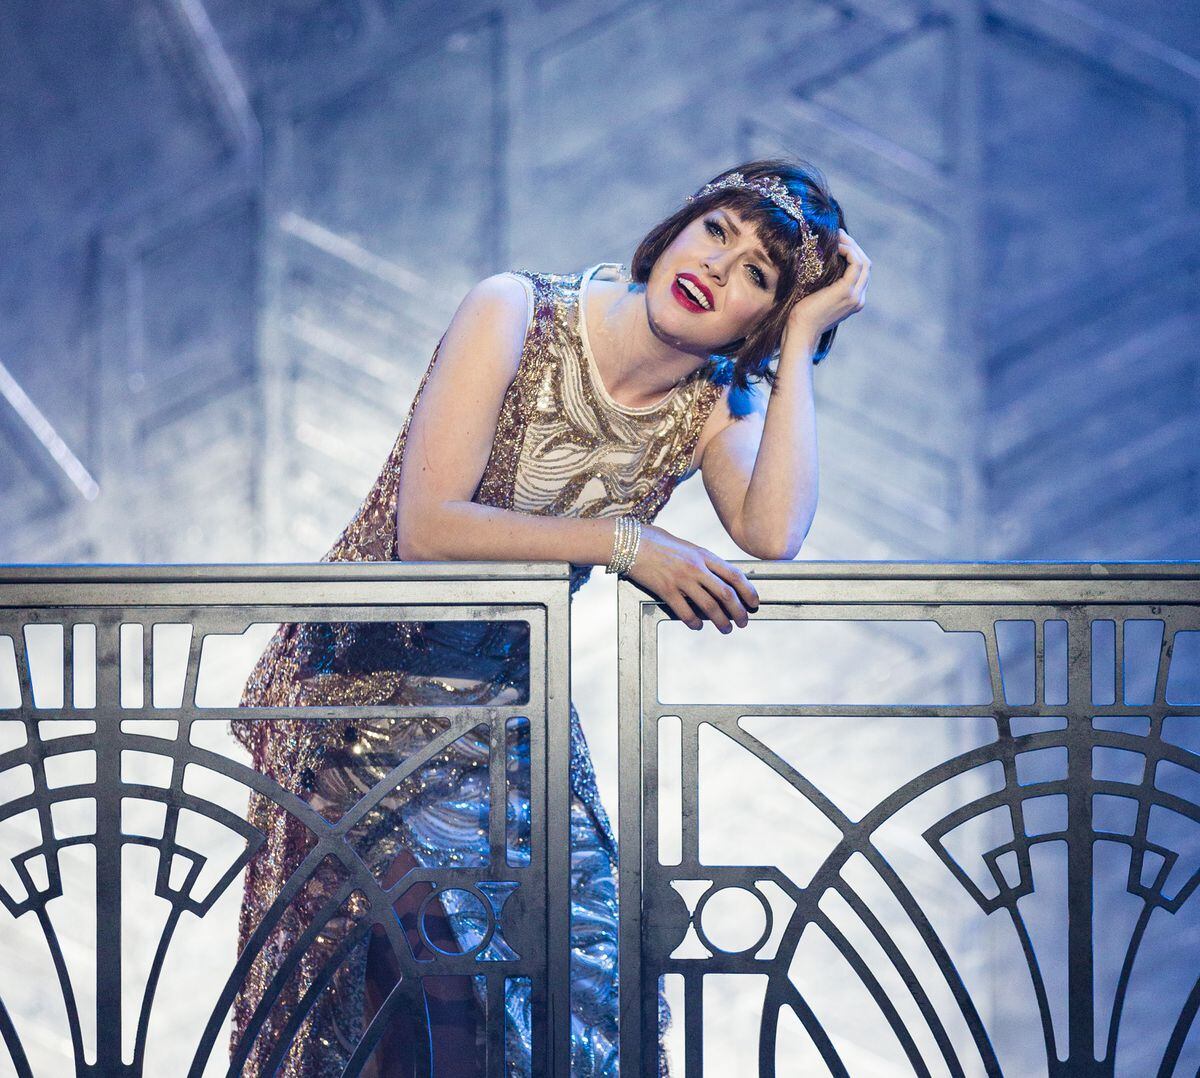 Joanne Clifton as Millie in Thoroughly Modern Millie